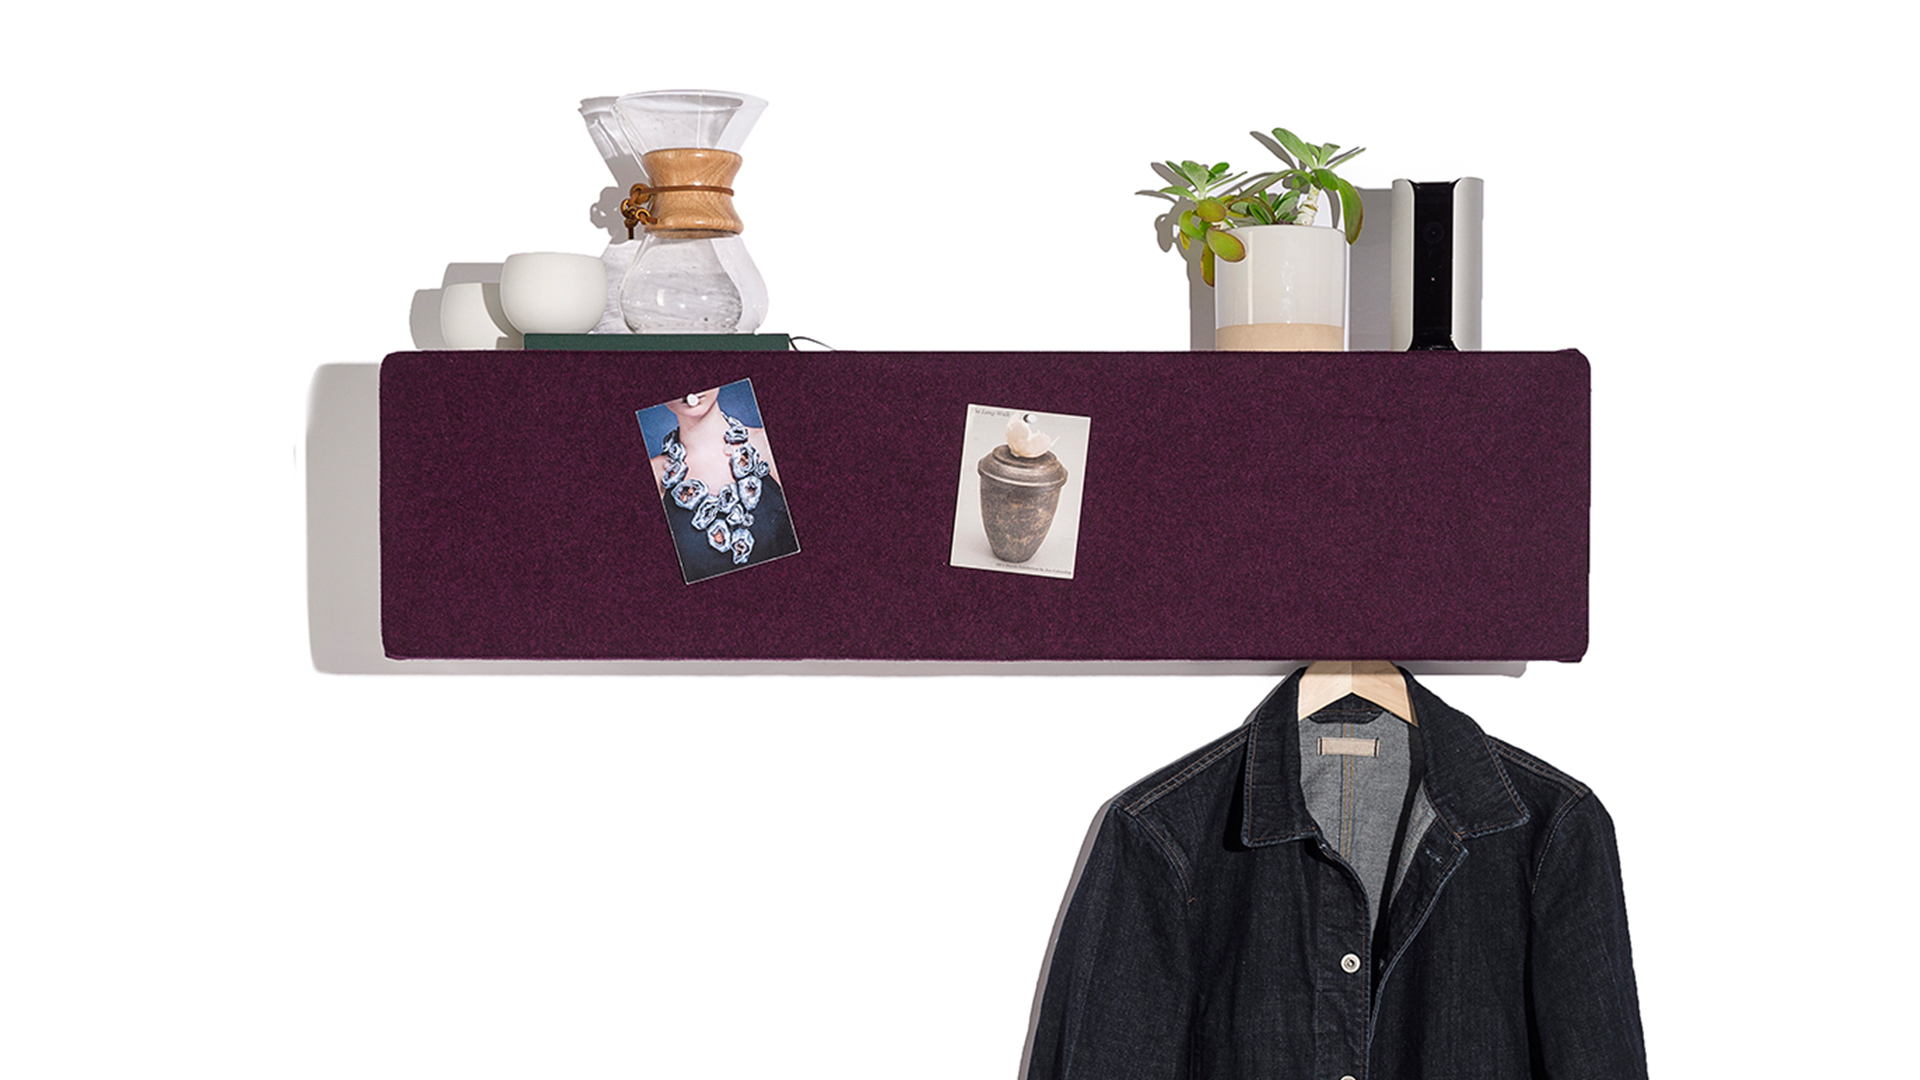 Long rectangular Pop Shelf with purple front, various objects on top, pictures pinned to front, and jacket on hanger hanging from behind front